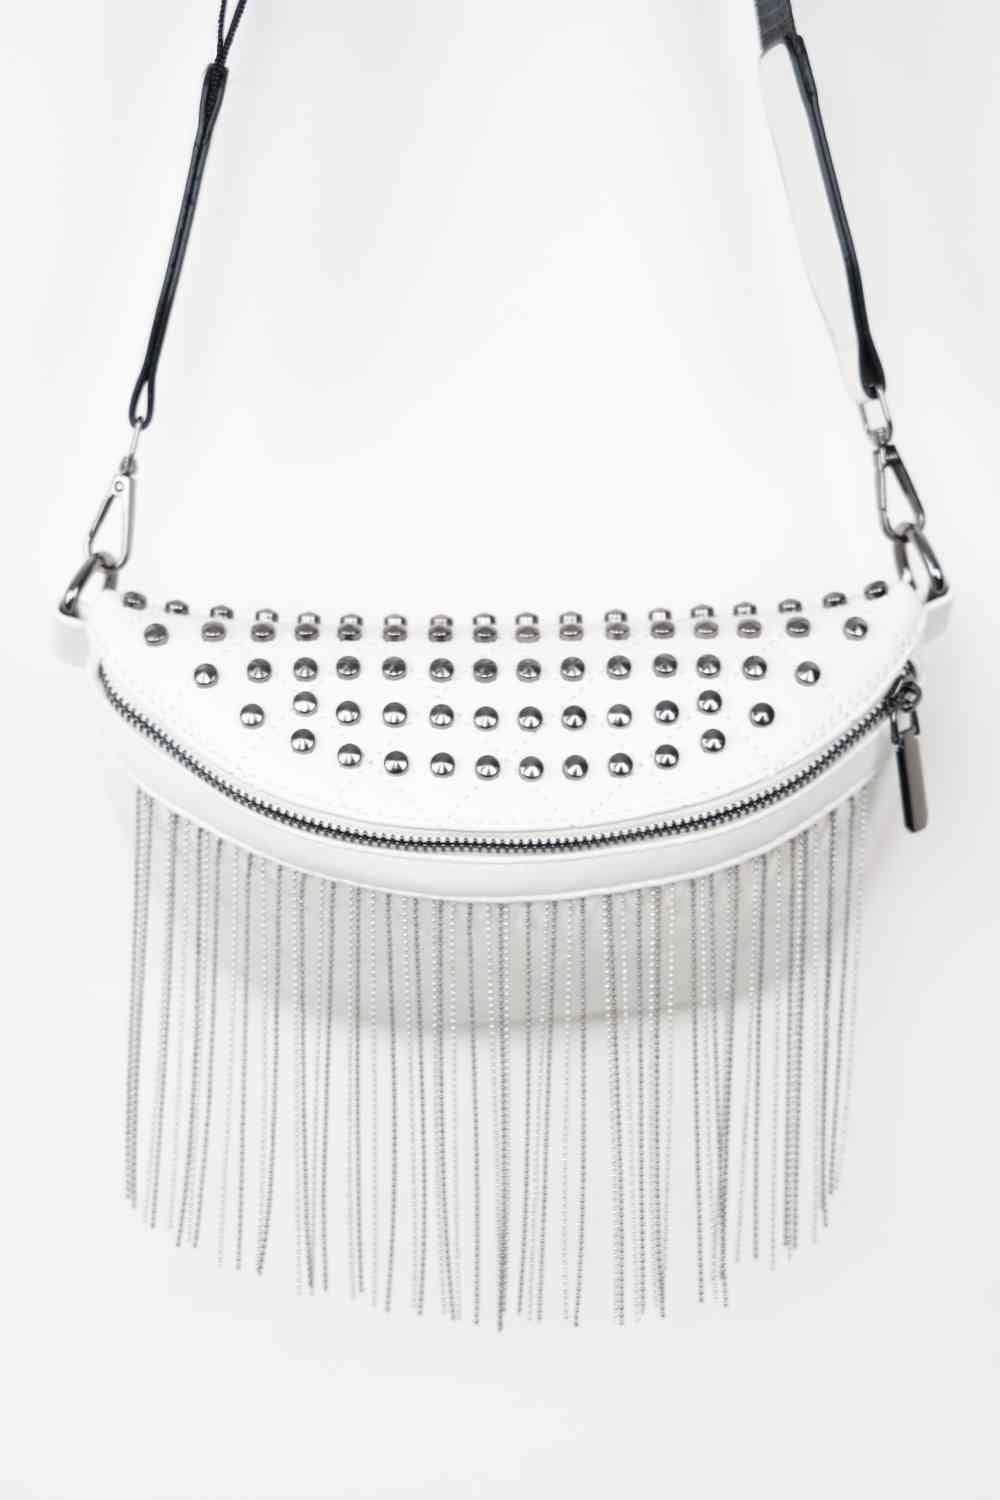 Adored PU Leather Studded Sling Bag with Fringes